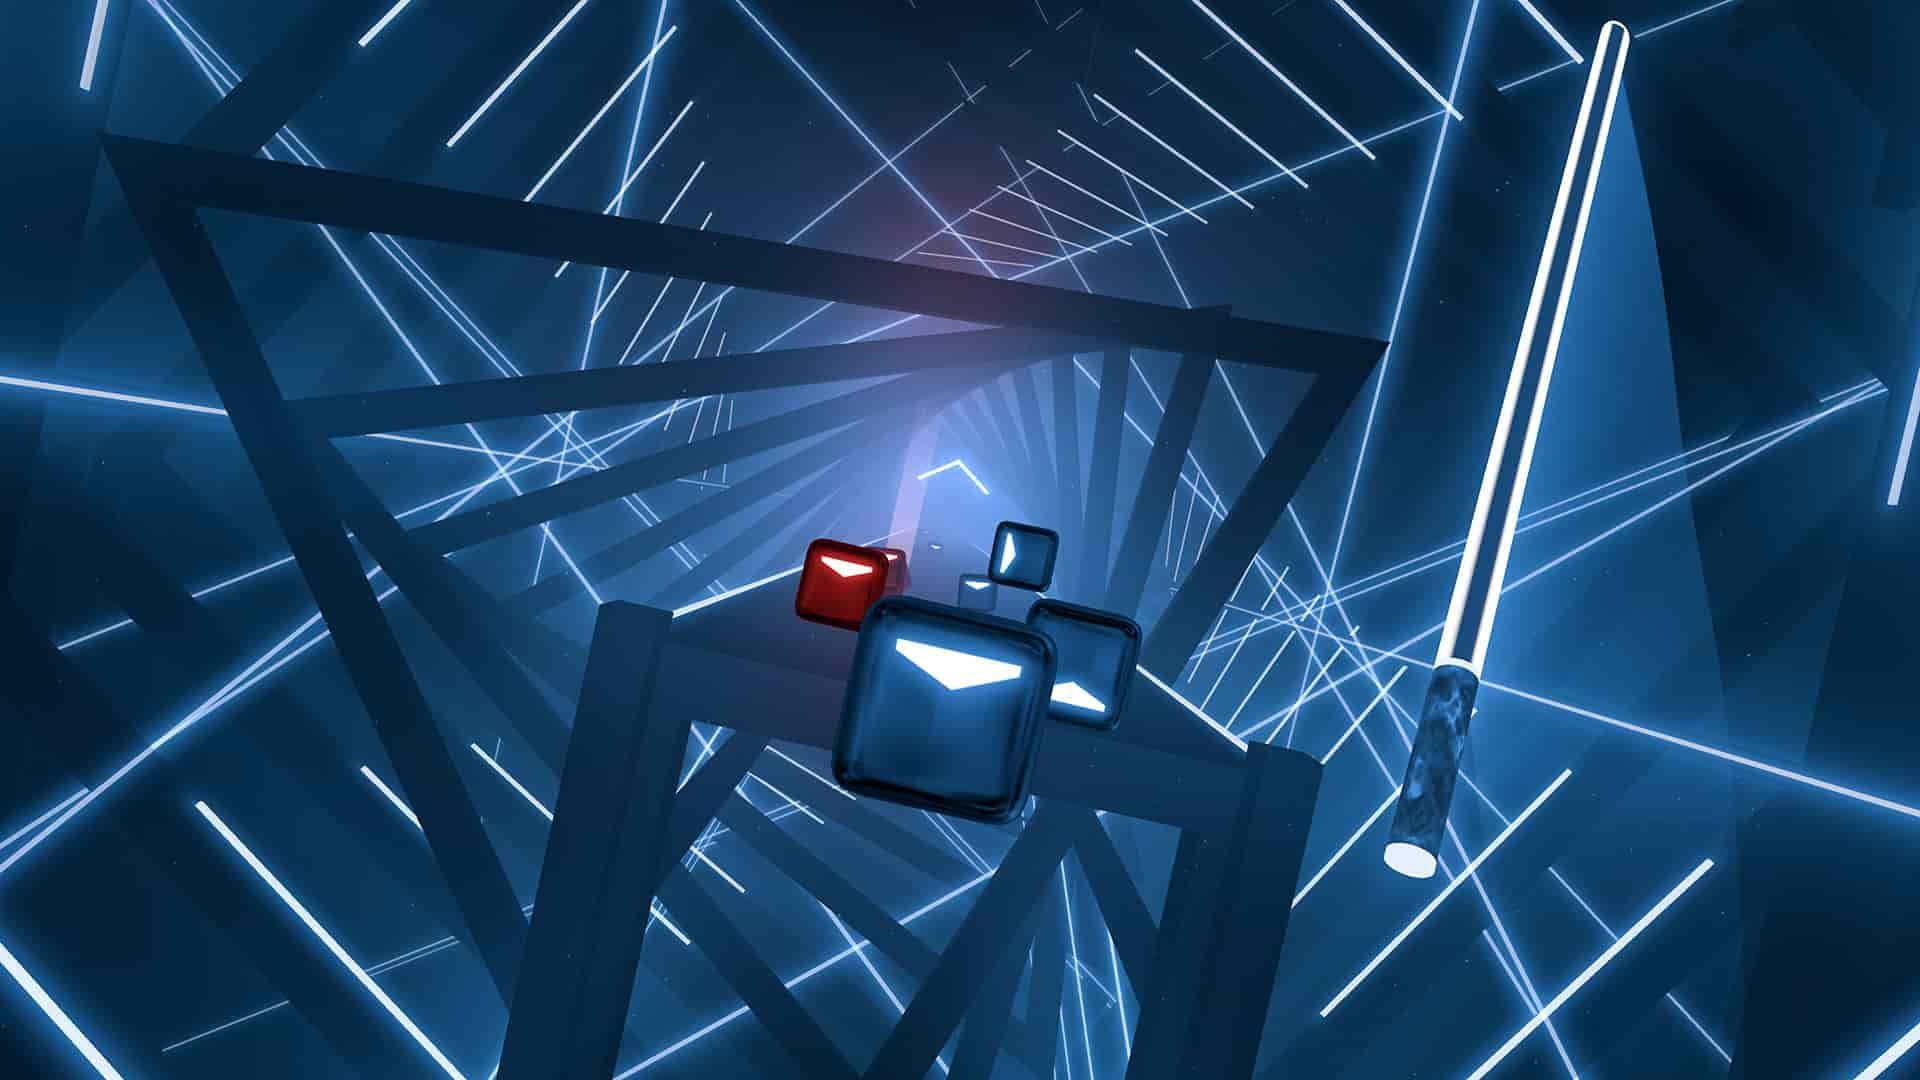 Beat Saber PS4 Update 1.36 Arrives With Minor Fixes - PlayStation Universe